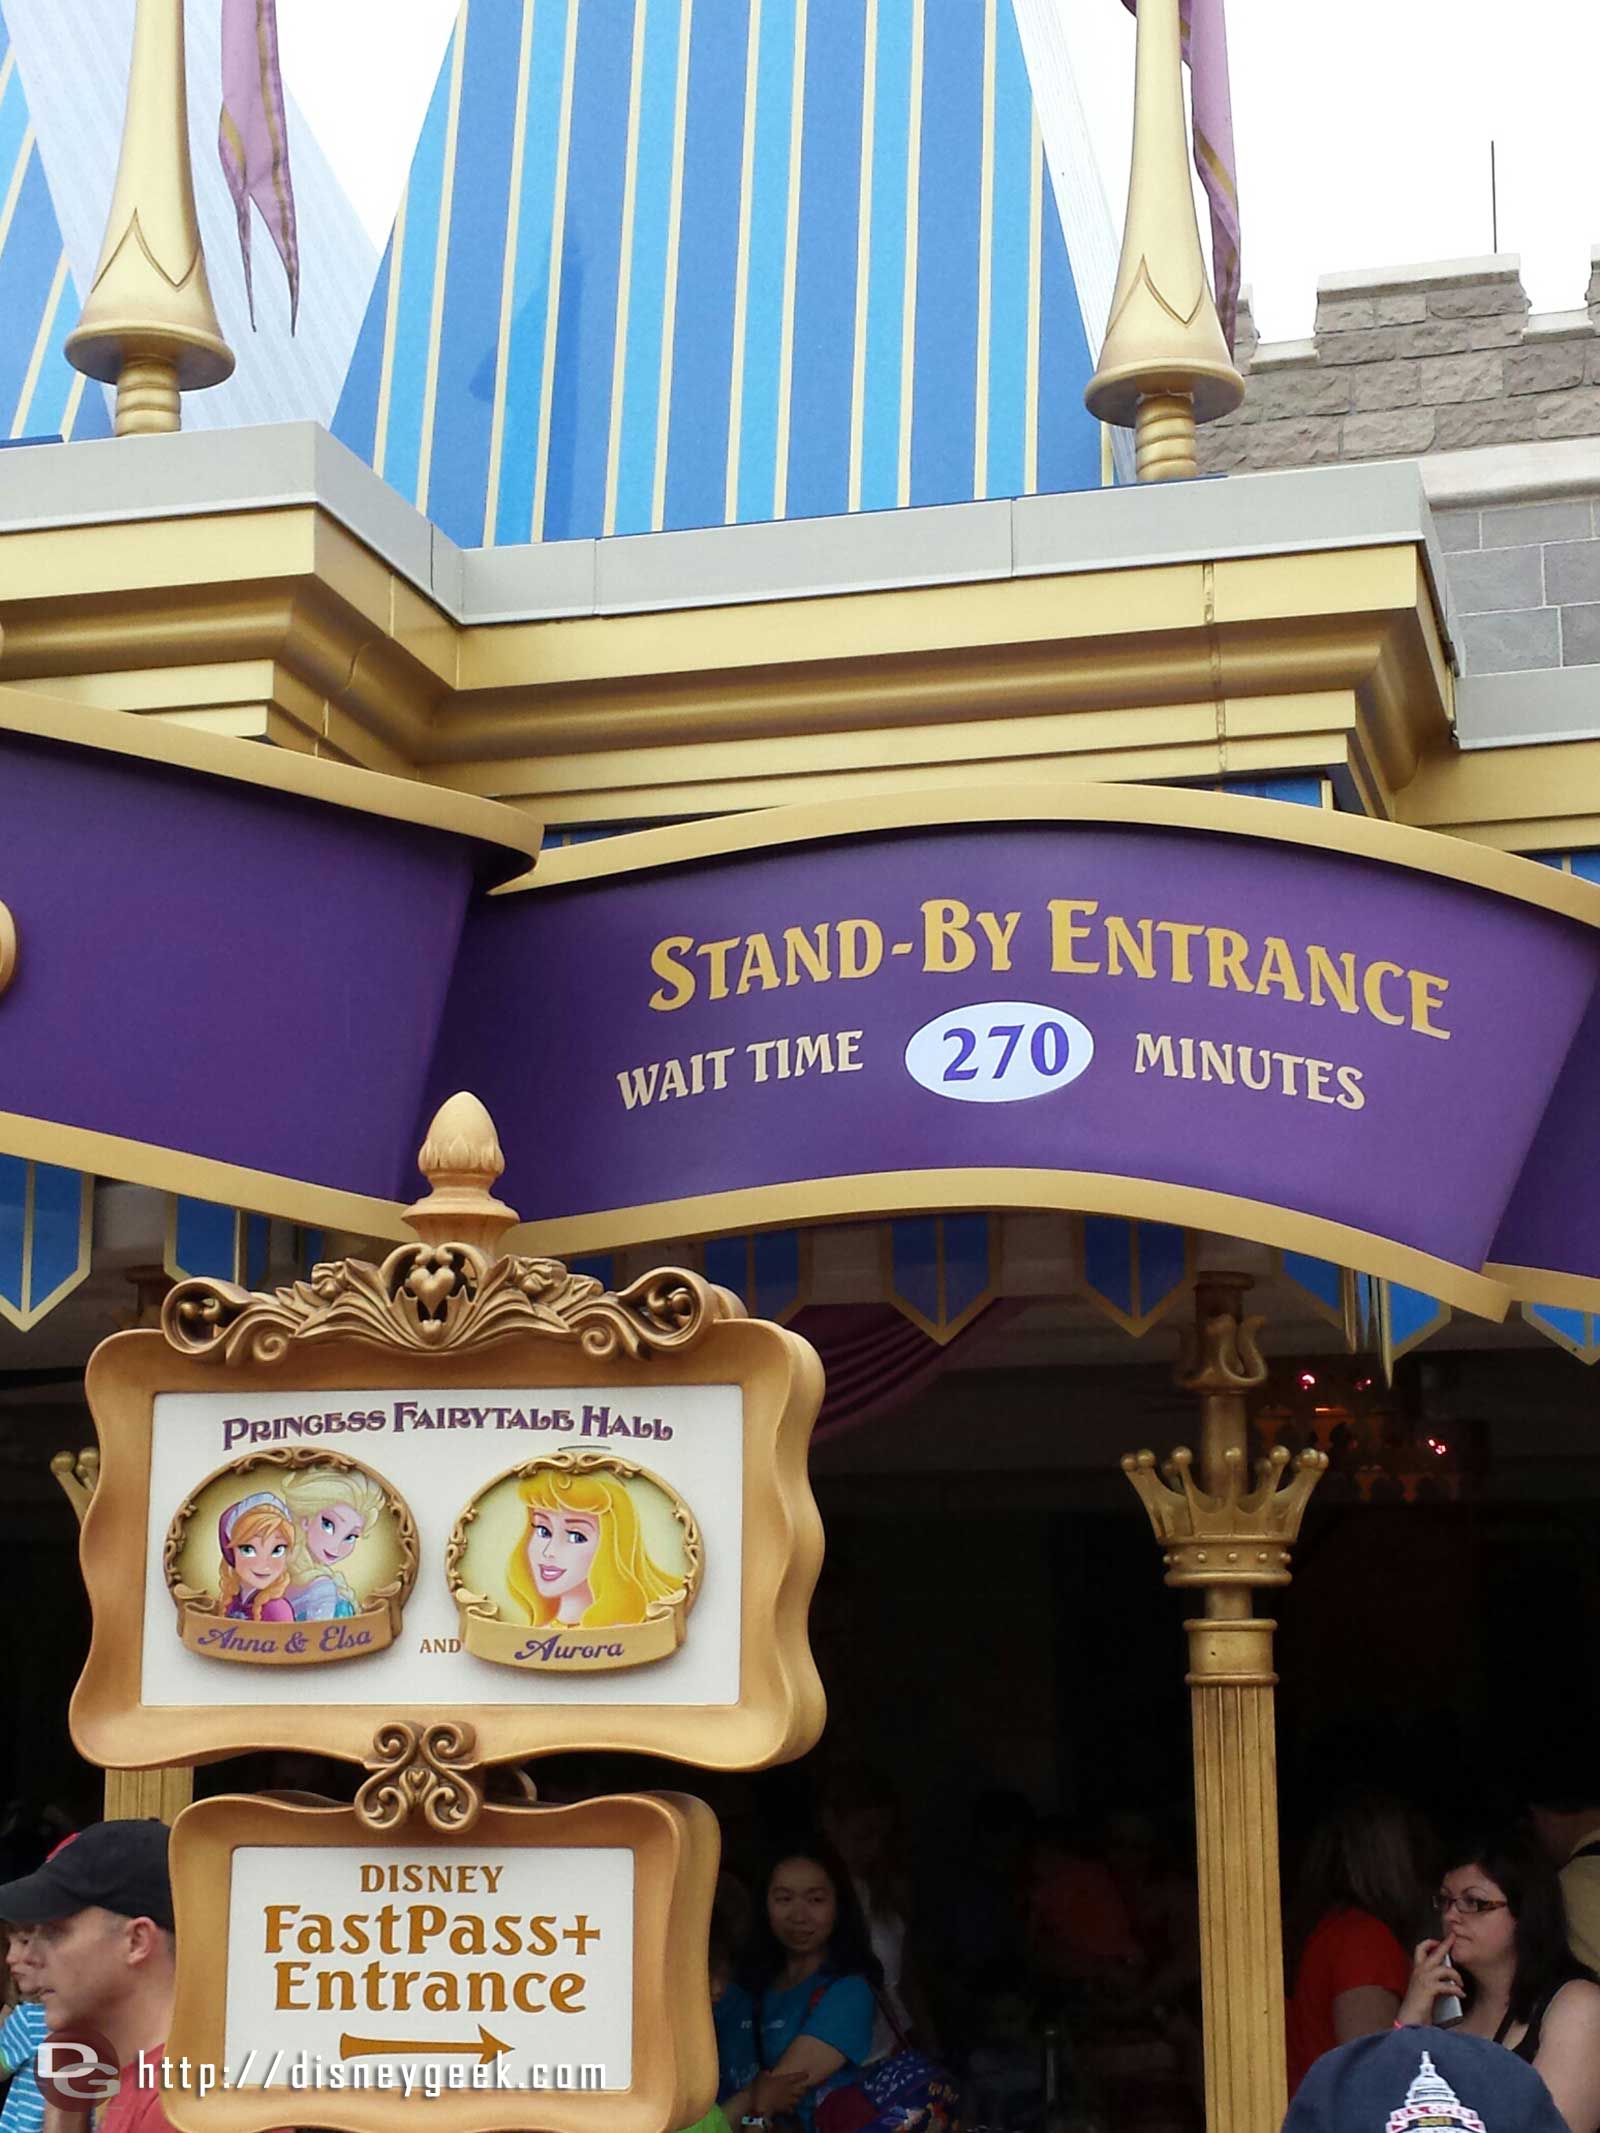 Even with the rain still a posted 270 min wait for the Frozen sisters.